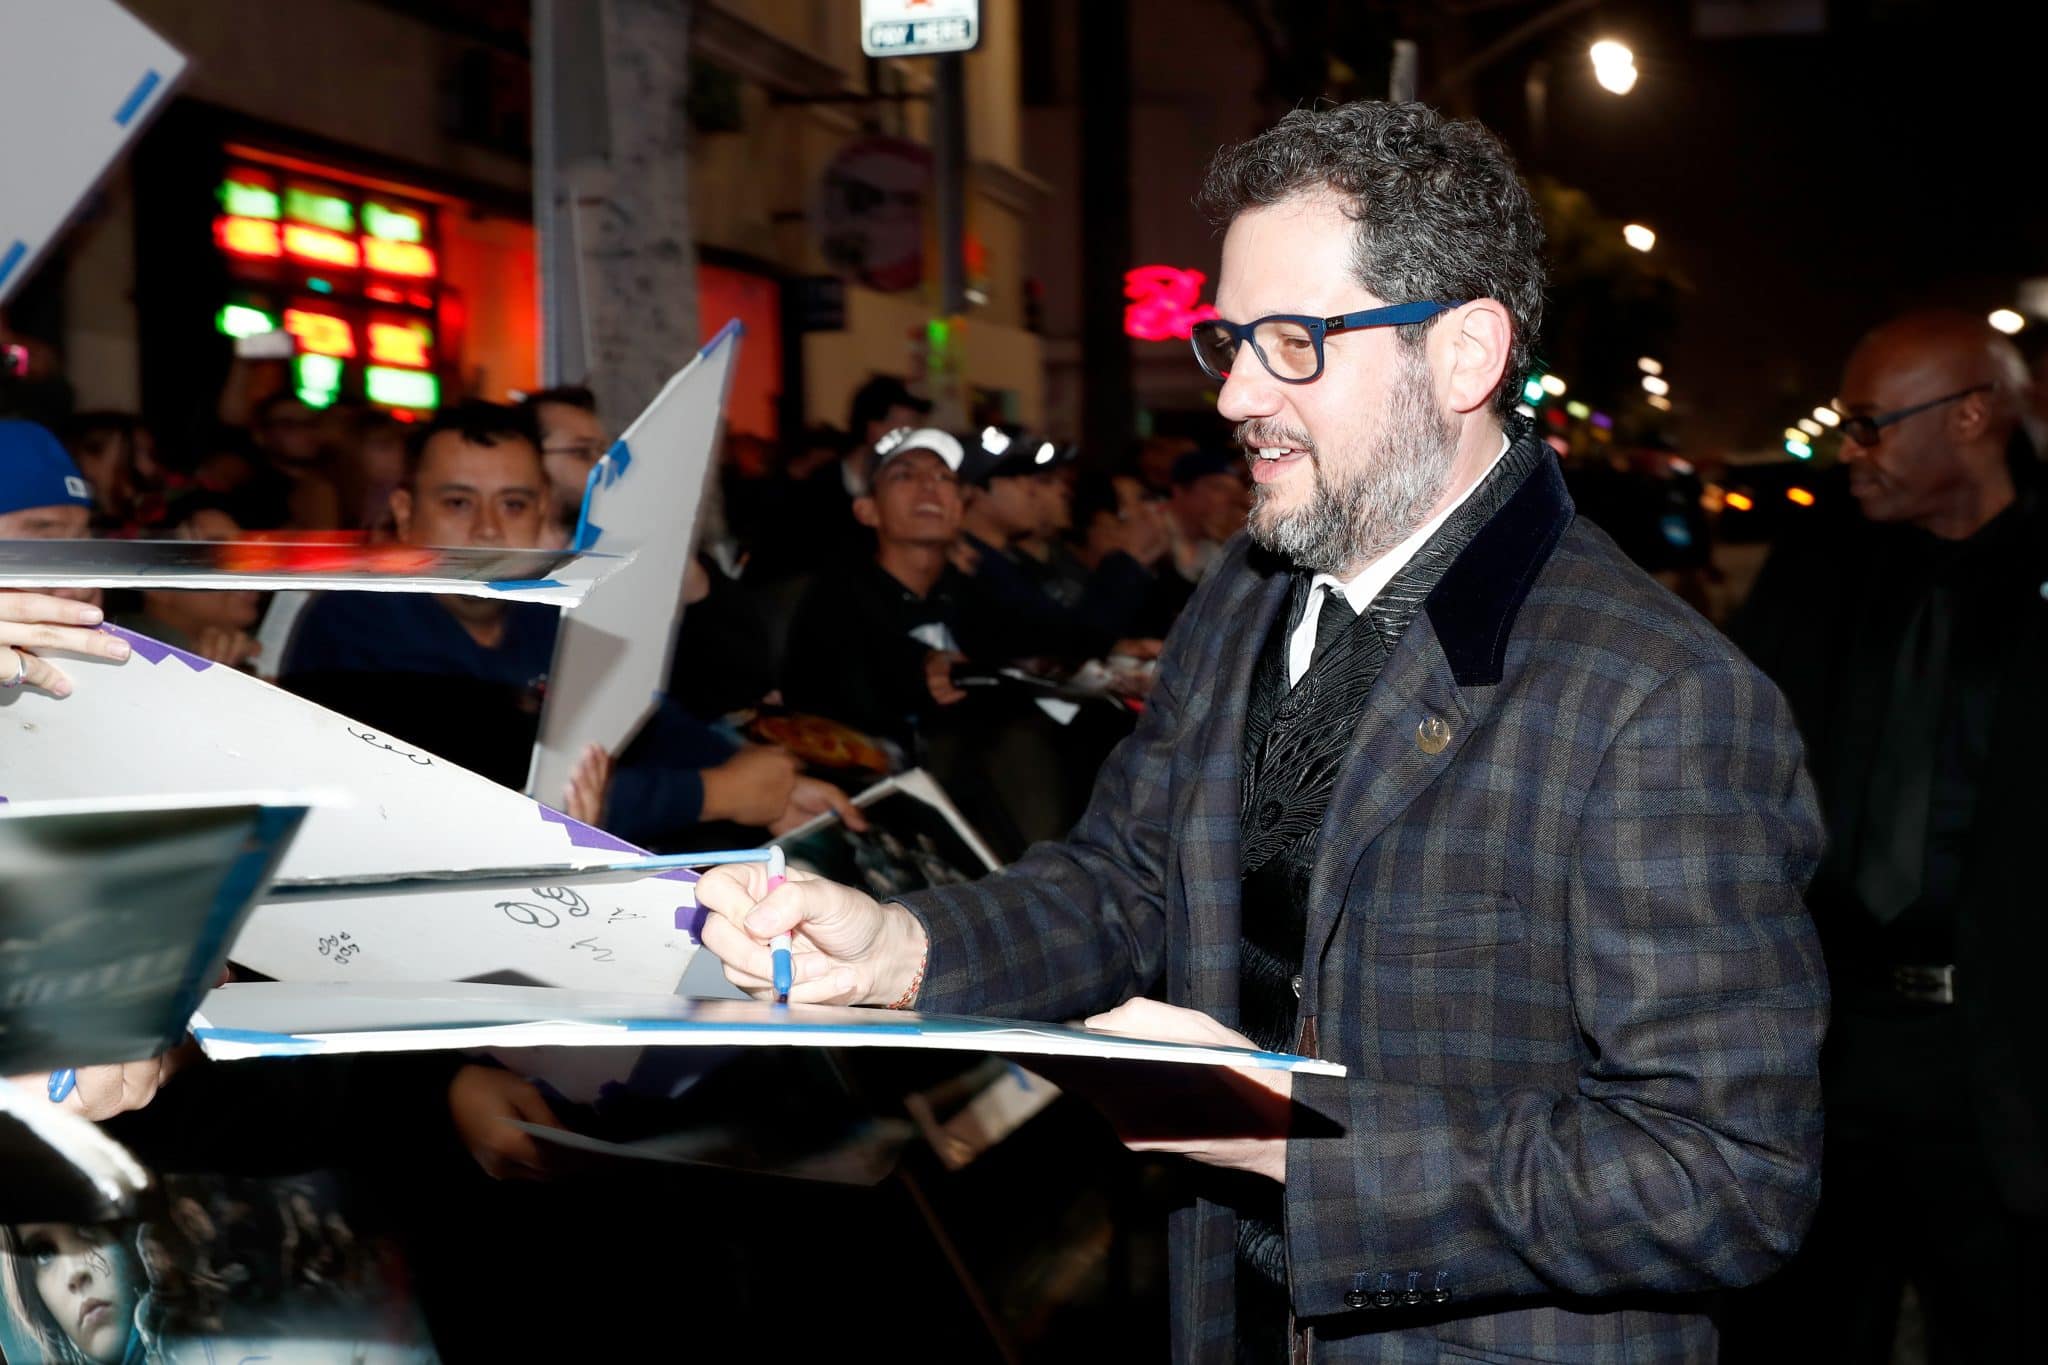 HOLLYWOOD, CA - DECEMBER 10:  Composer Michael Giacchino (R) signs autographs at The World Premiere of Lucasfilm's highly anticipated, first-ever, standalone Star Wars adventure, "Rogue One: A Star Wars Story" at the Pantages Theatre on December 10, 2016 in Hollywood, California.  (Photo by Rich Polk/Getty Images for Disney) *** Local Caption *** Michael Giacchino